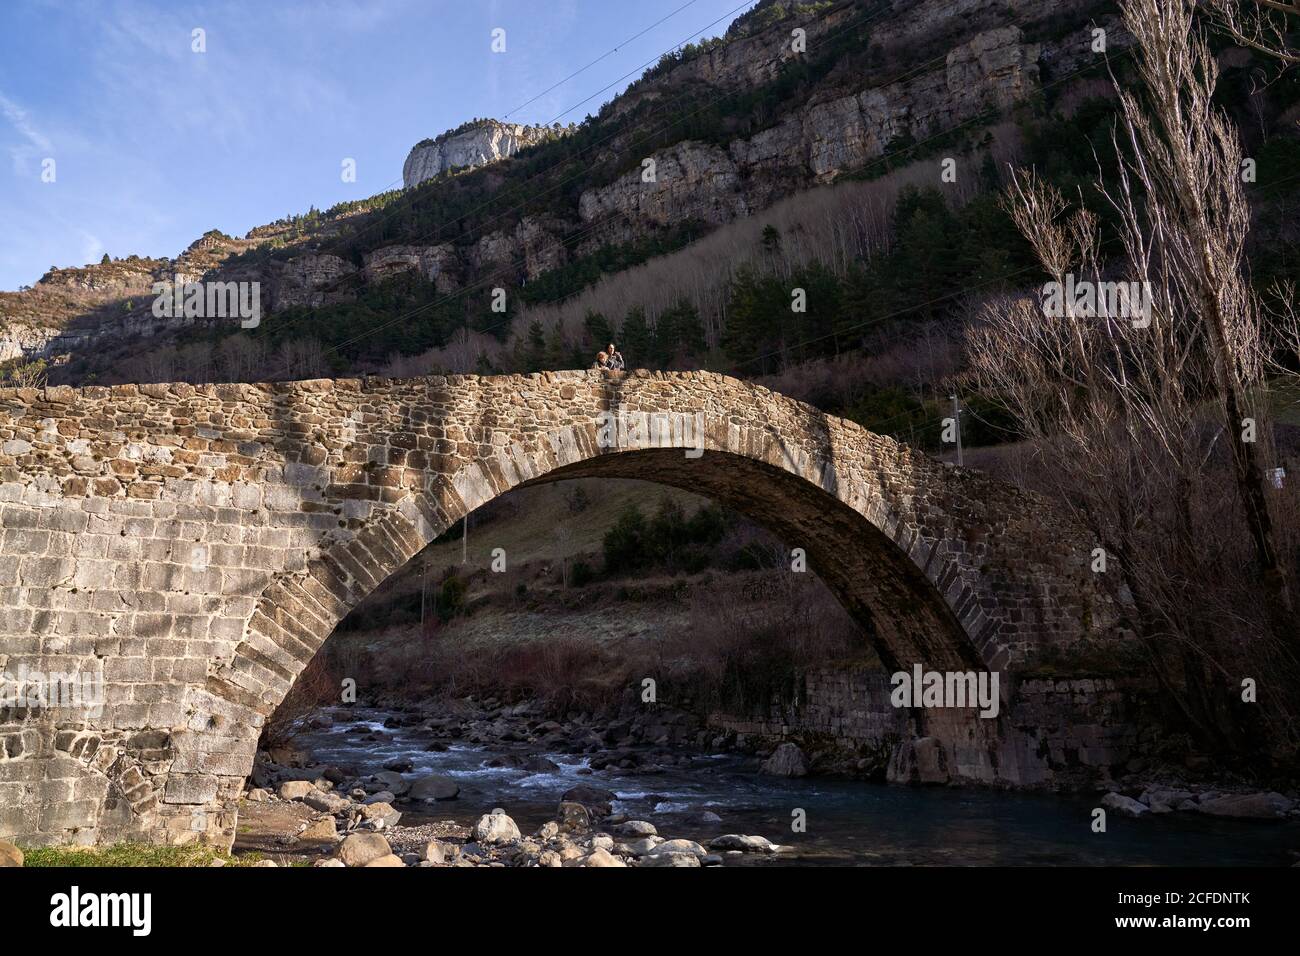 Woman and child appreciating landscape of ancient arched bridge in mountains crossing stream with dry leafless trees in bright day Stock Photo